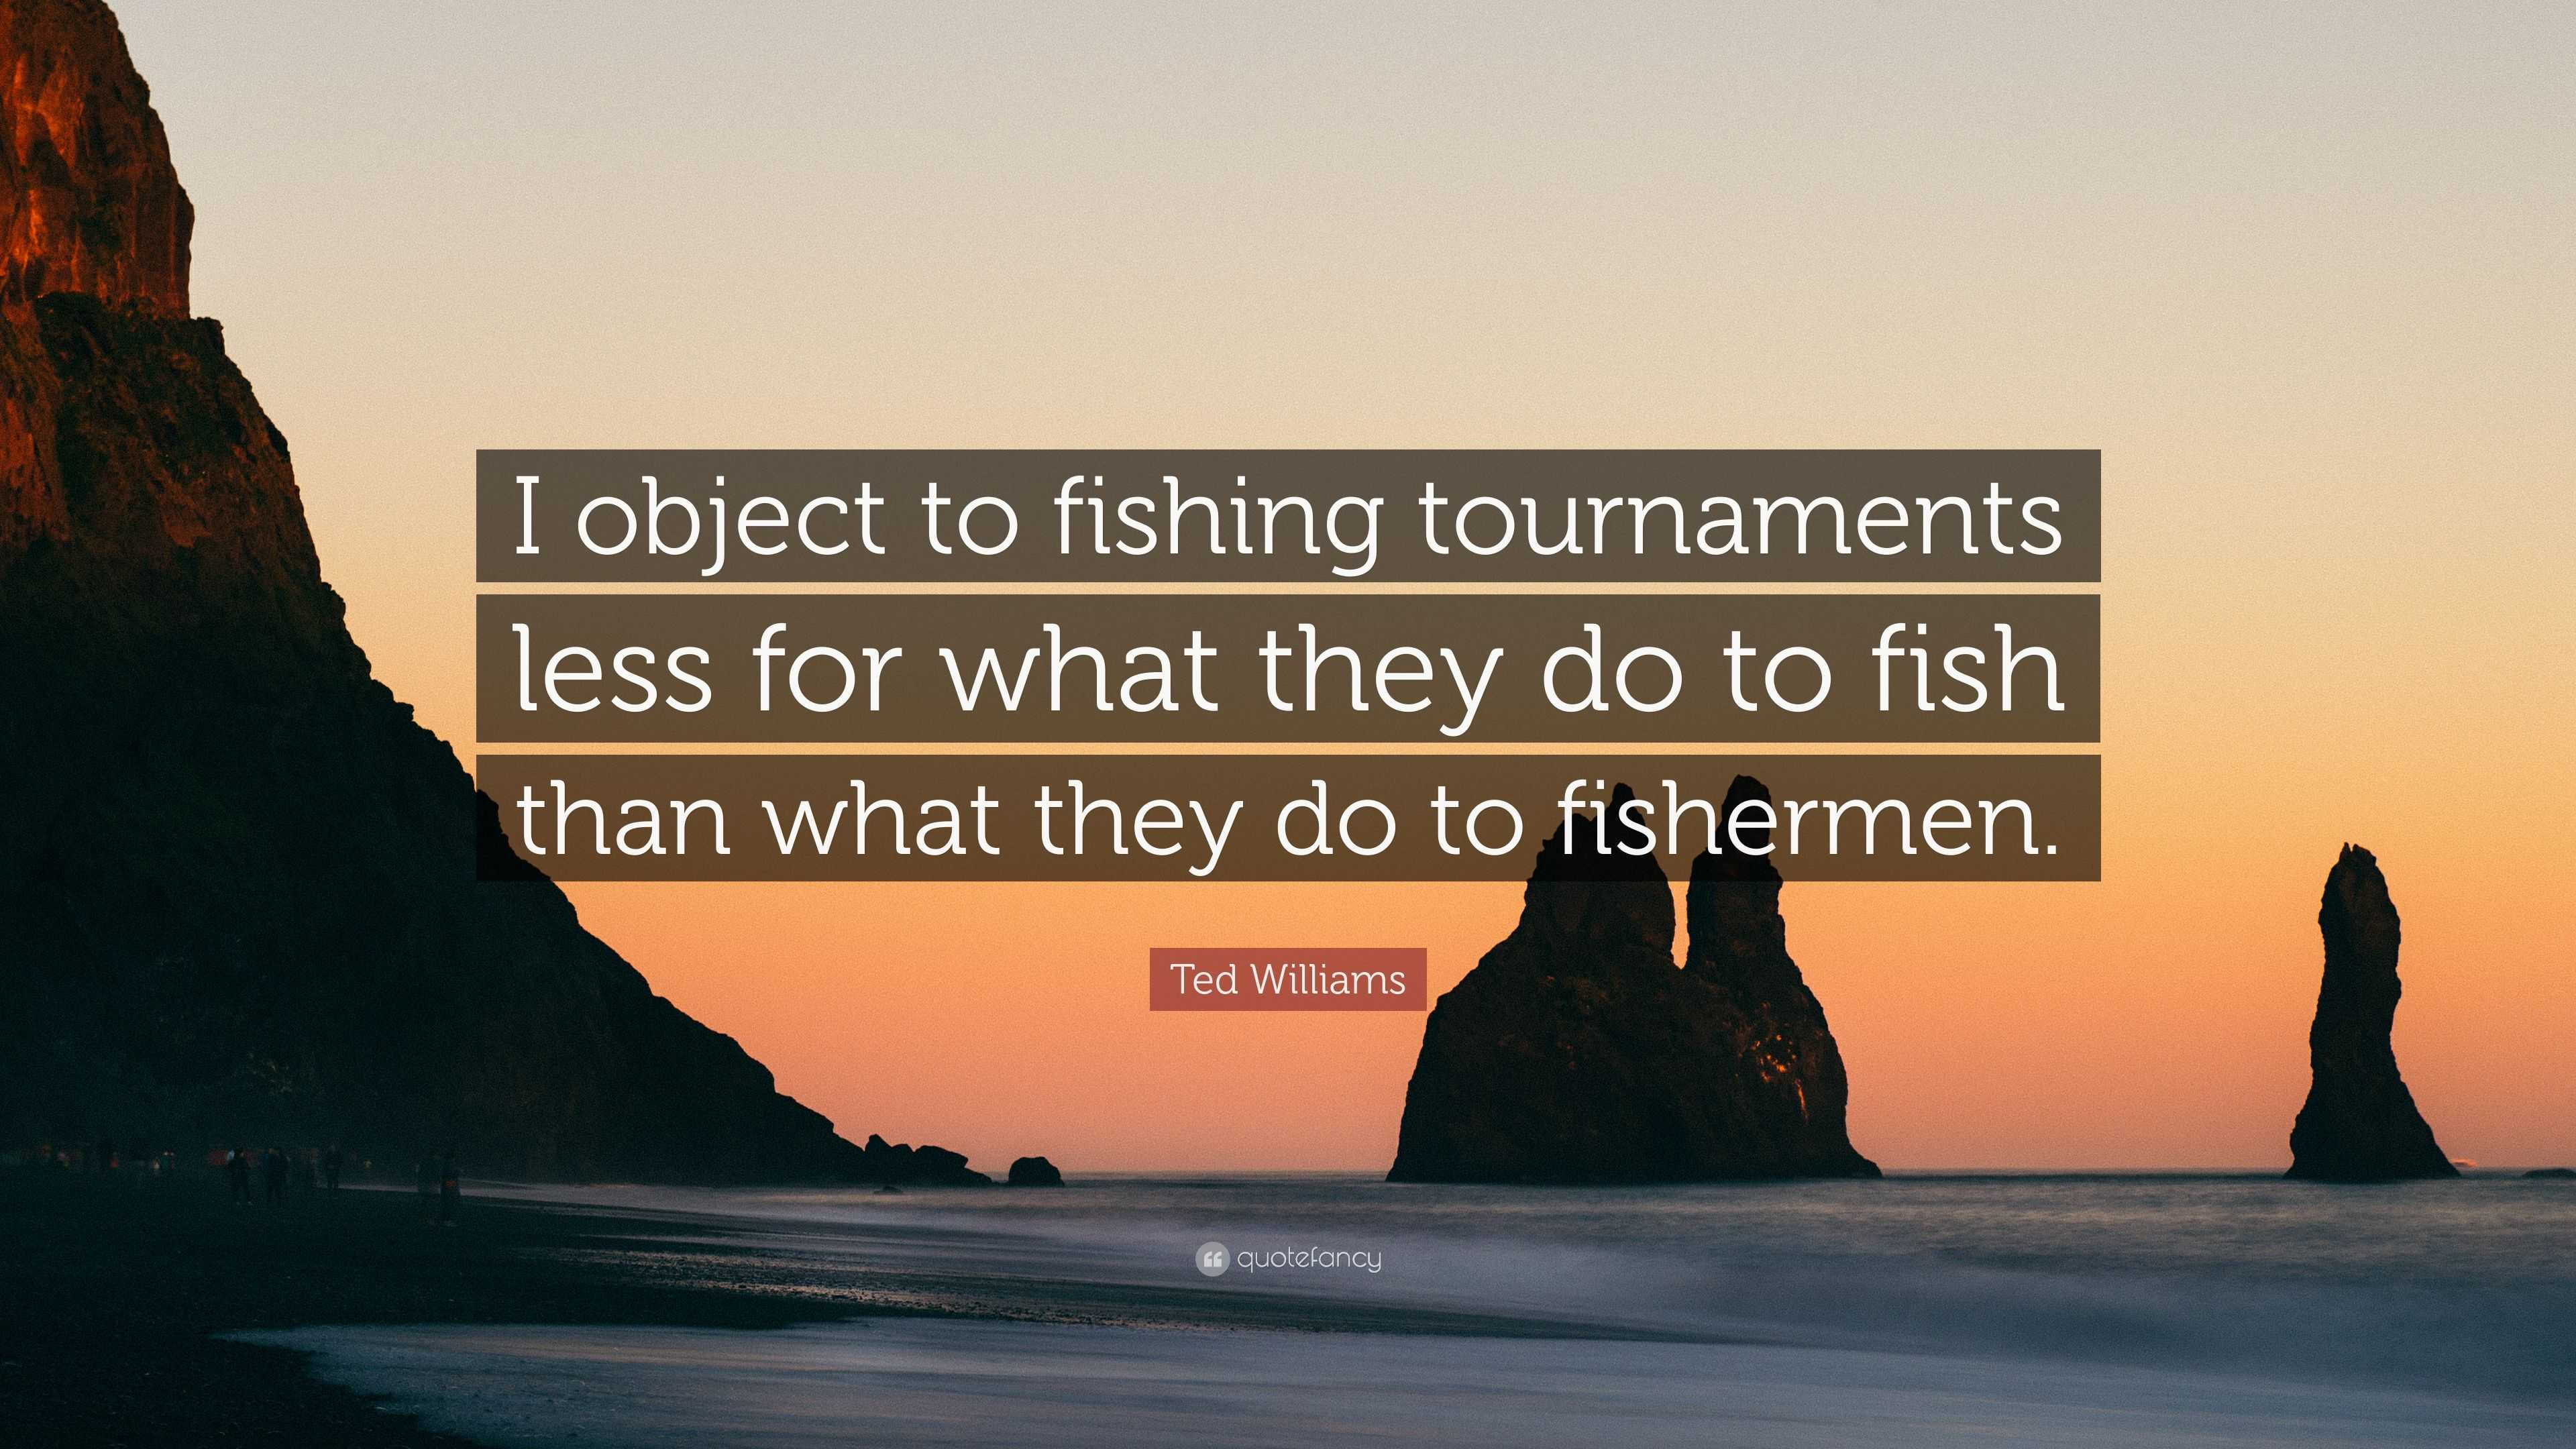 Ted Williams Quote: “I object to fishing tournaments less for what they do  to fish than